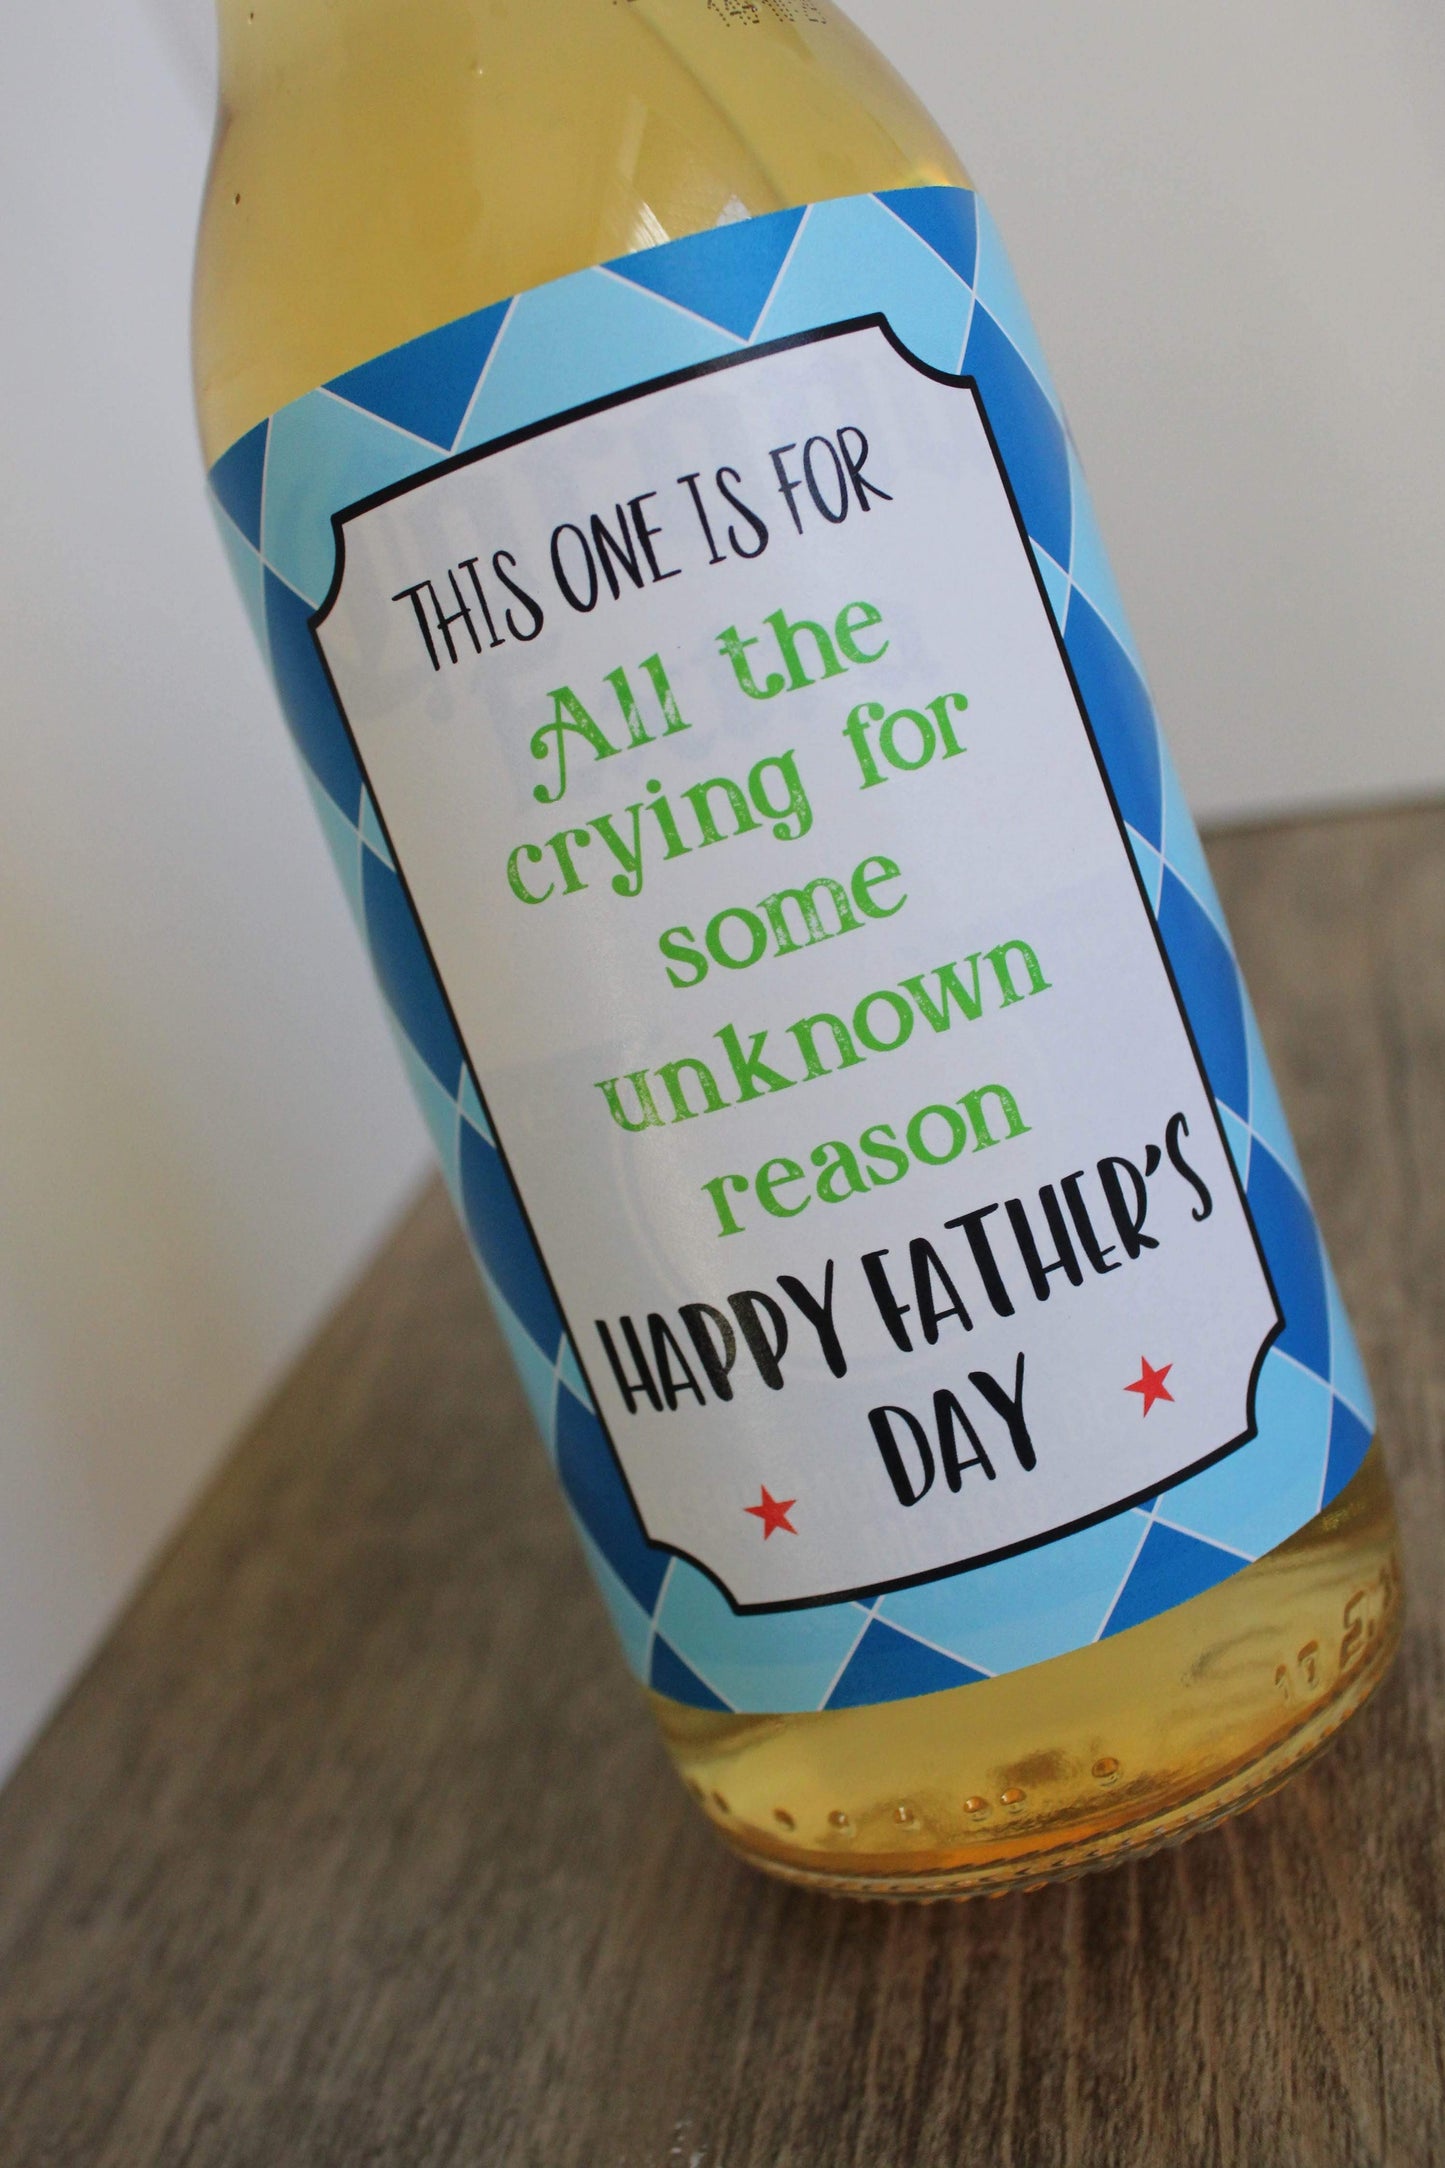 E&L Designs Personalised Beer Bottle Labels - First Father's Day